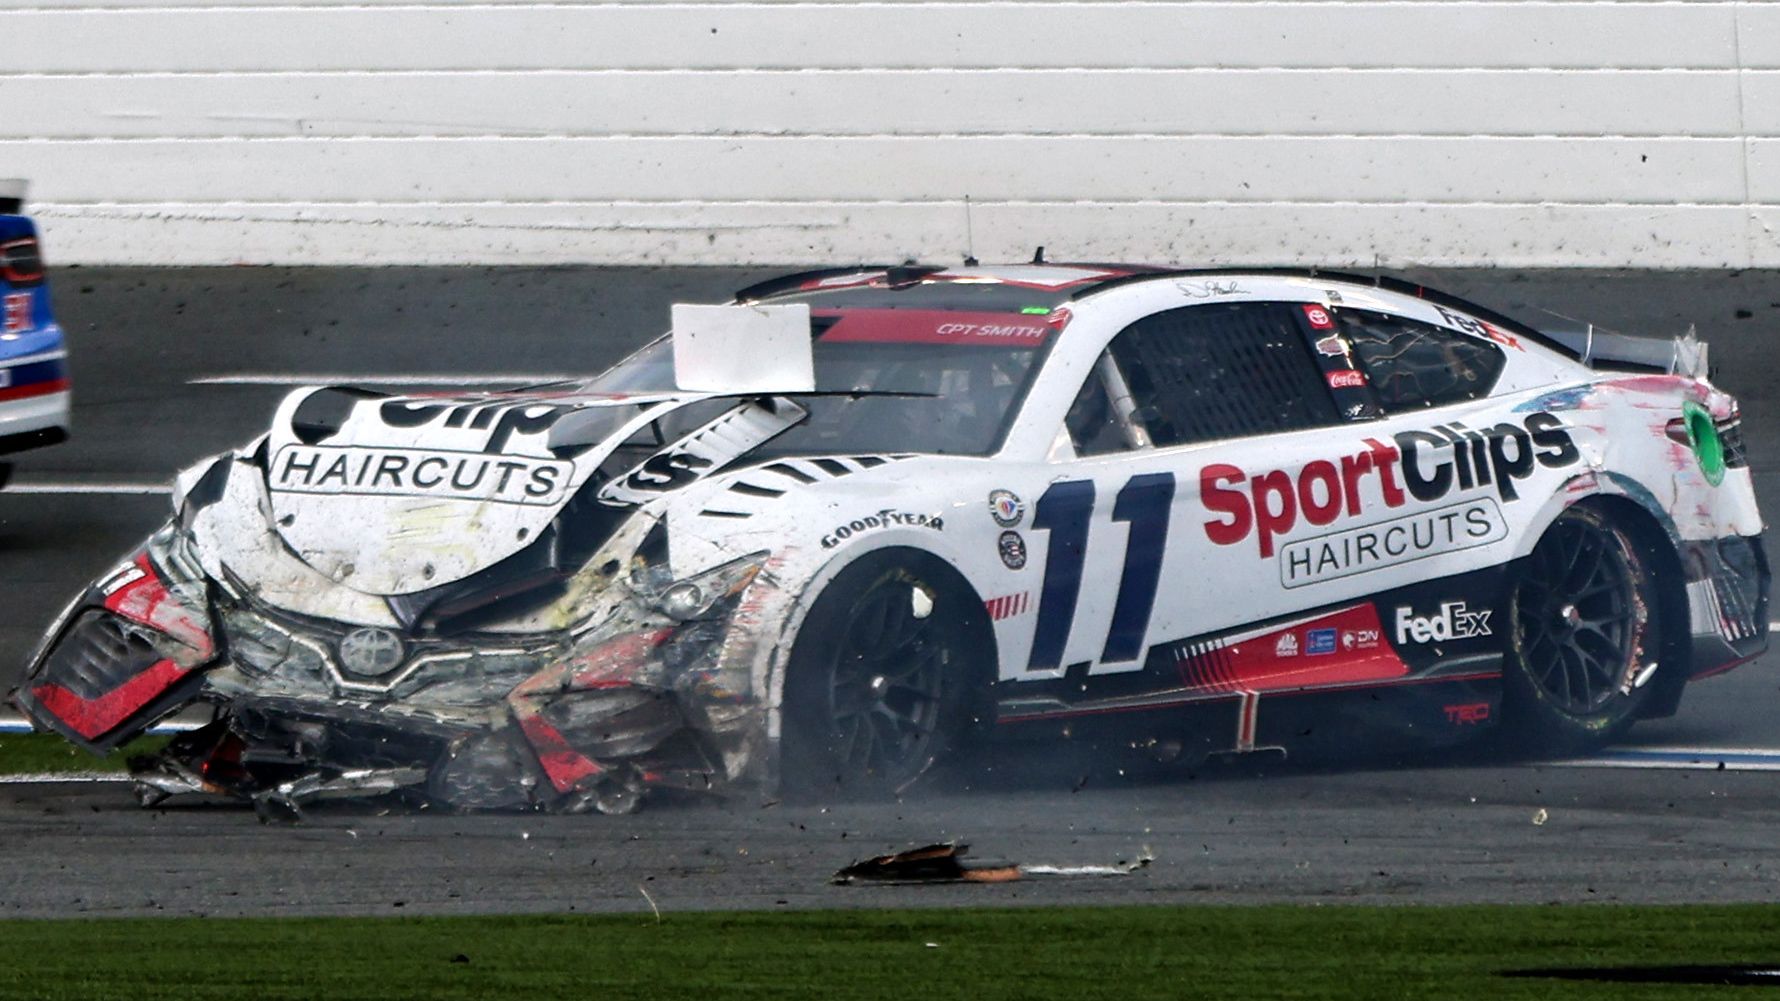 Denny Hamlin, driver of the No.11 Toyota, lays idle on the race track after being wrecked by Chase Elliott.